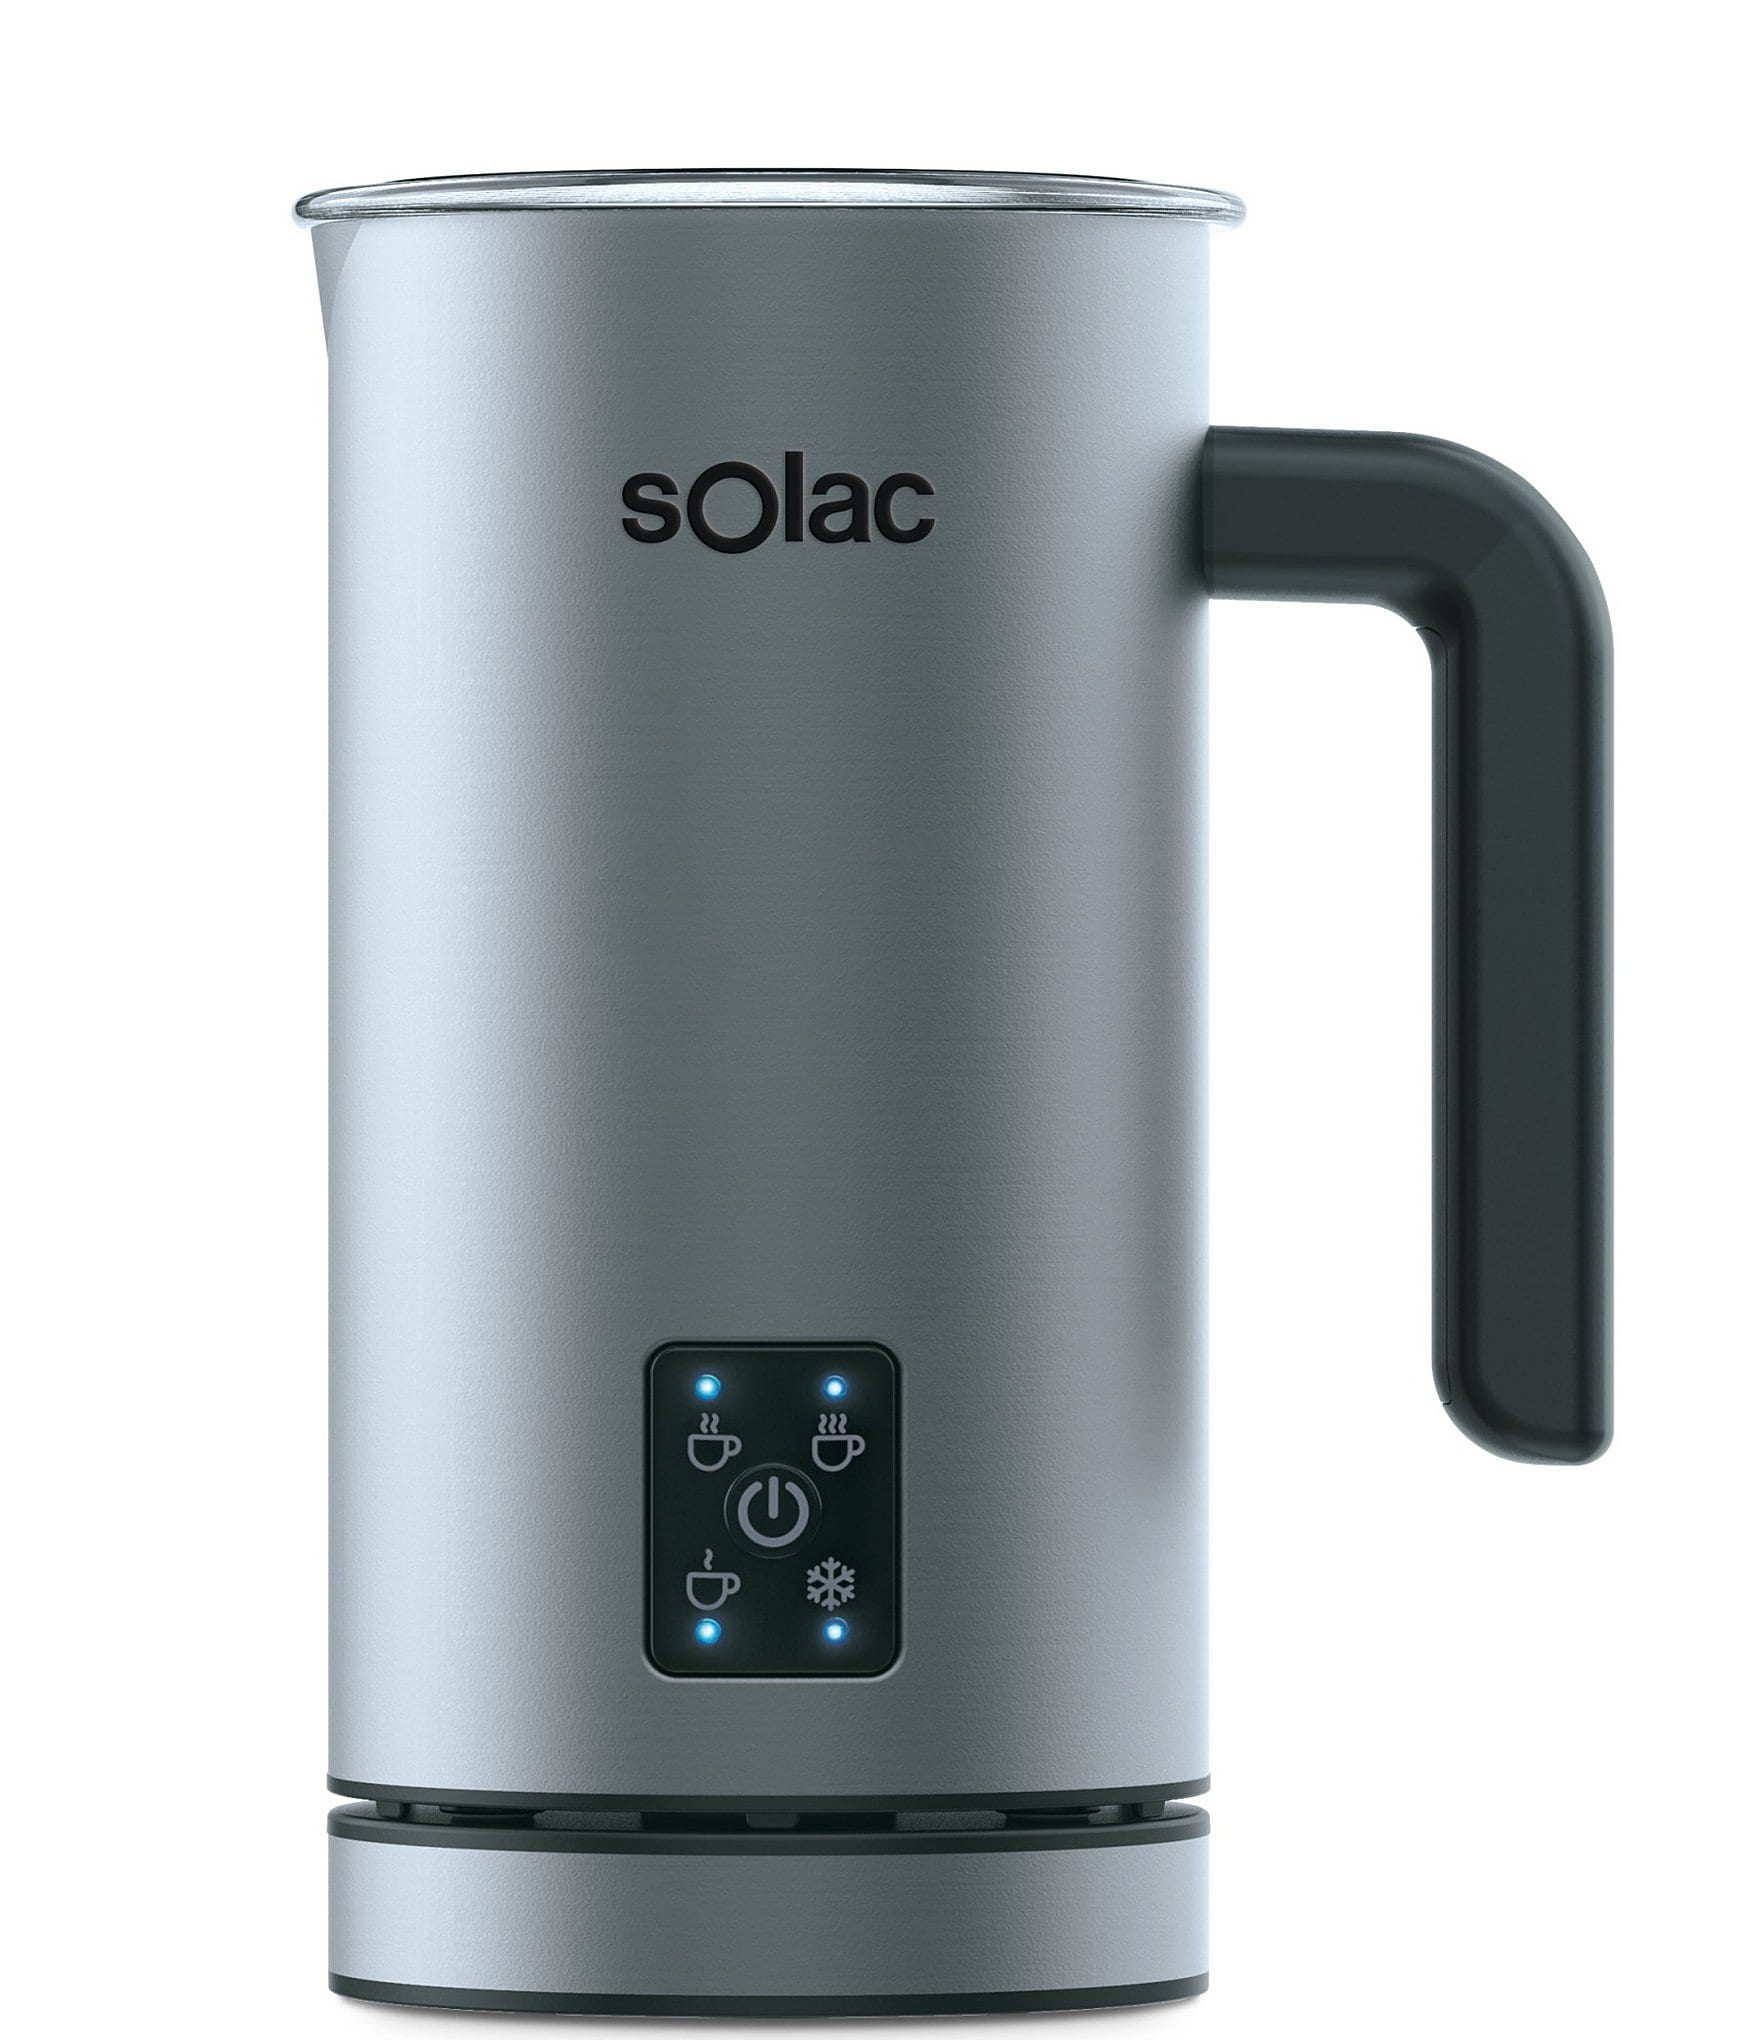 https://dimg.dillards.com/is/image/DillardsZoom/zoom/solac-pro-foam-stainless-steel--milk-frother--hot-chocolate-mixer/00000000_zi_61f931b6-8340-4007-9d18-d813ab3bde26.jpg